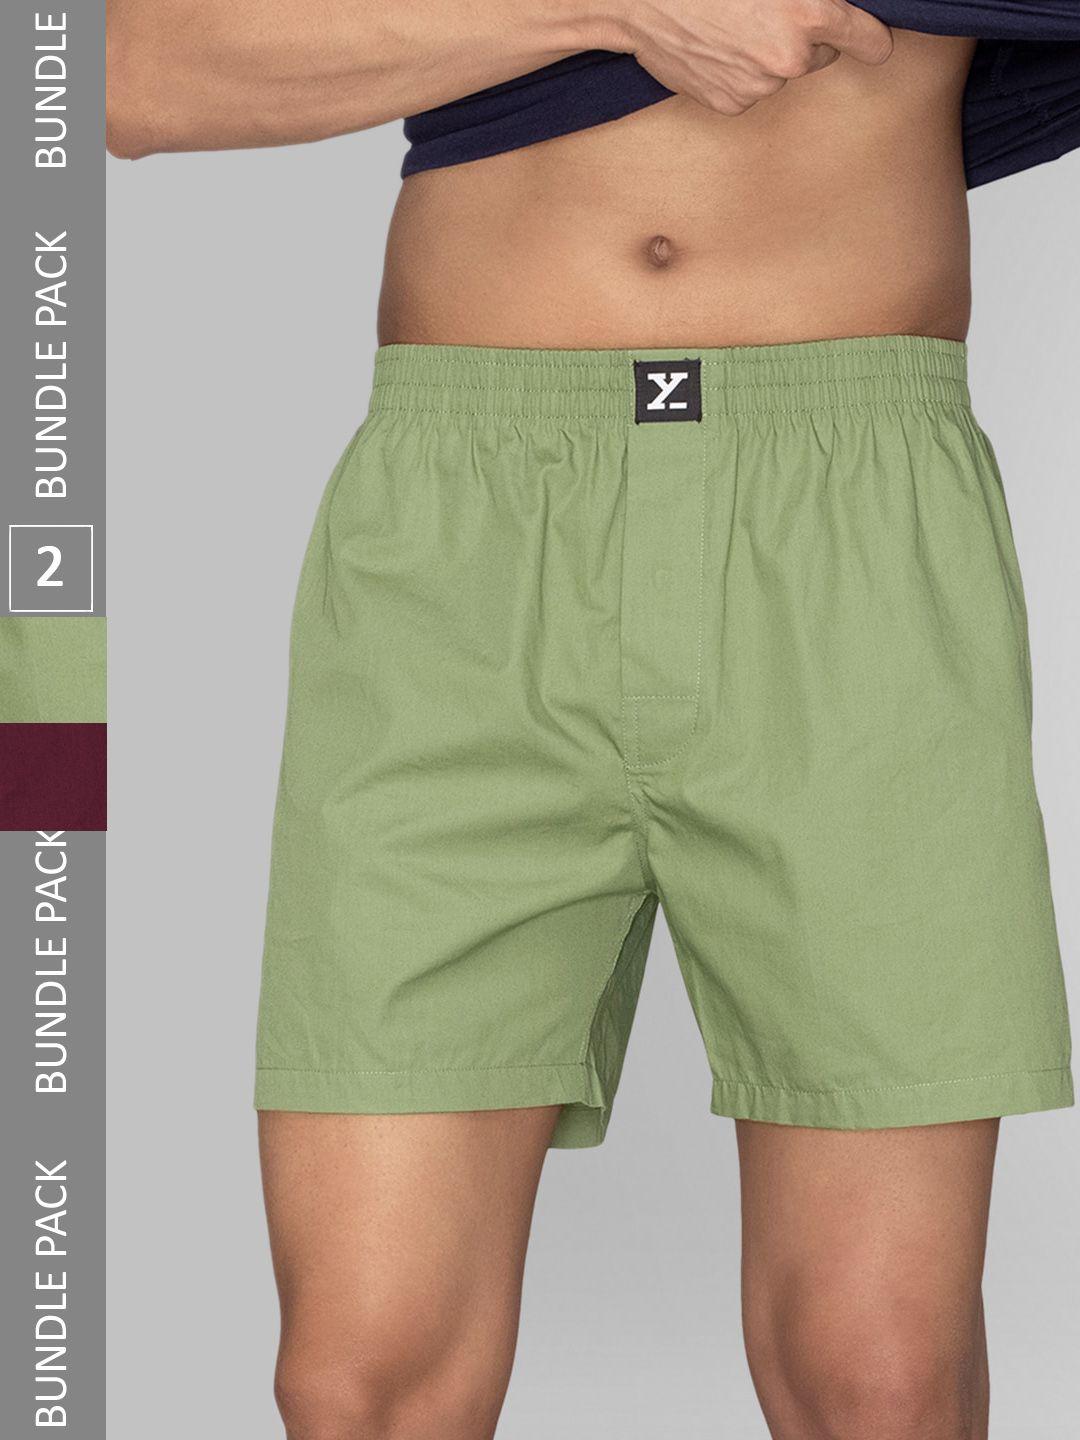 xyxx men pack of 2 cotton boxers xybox2pckn342